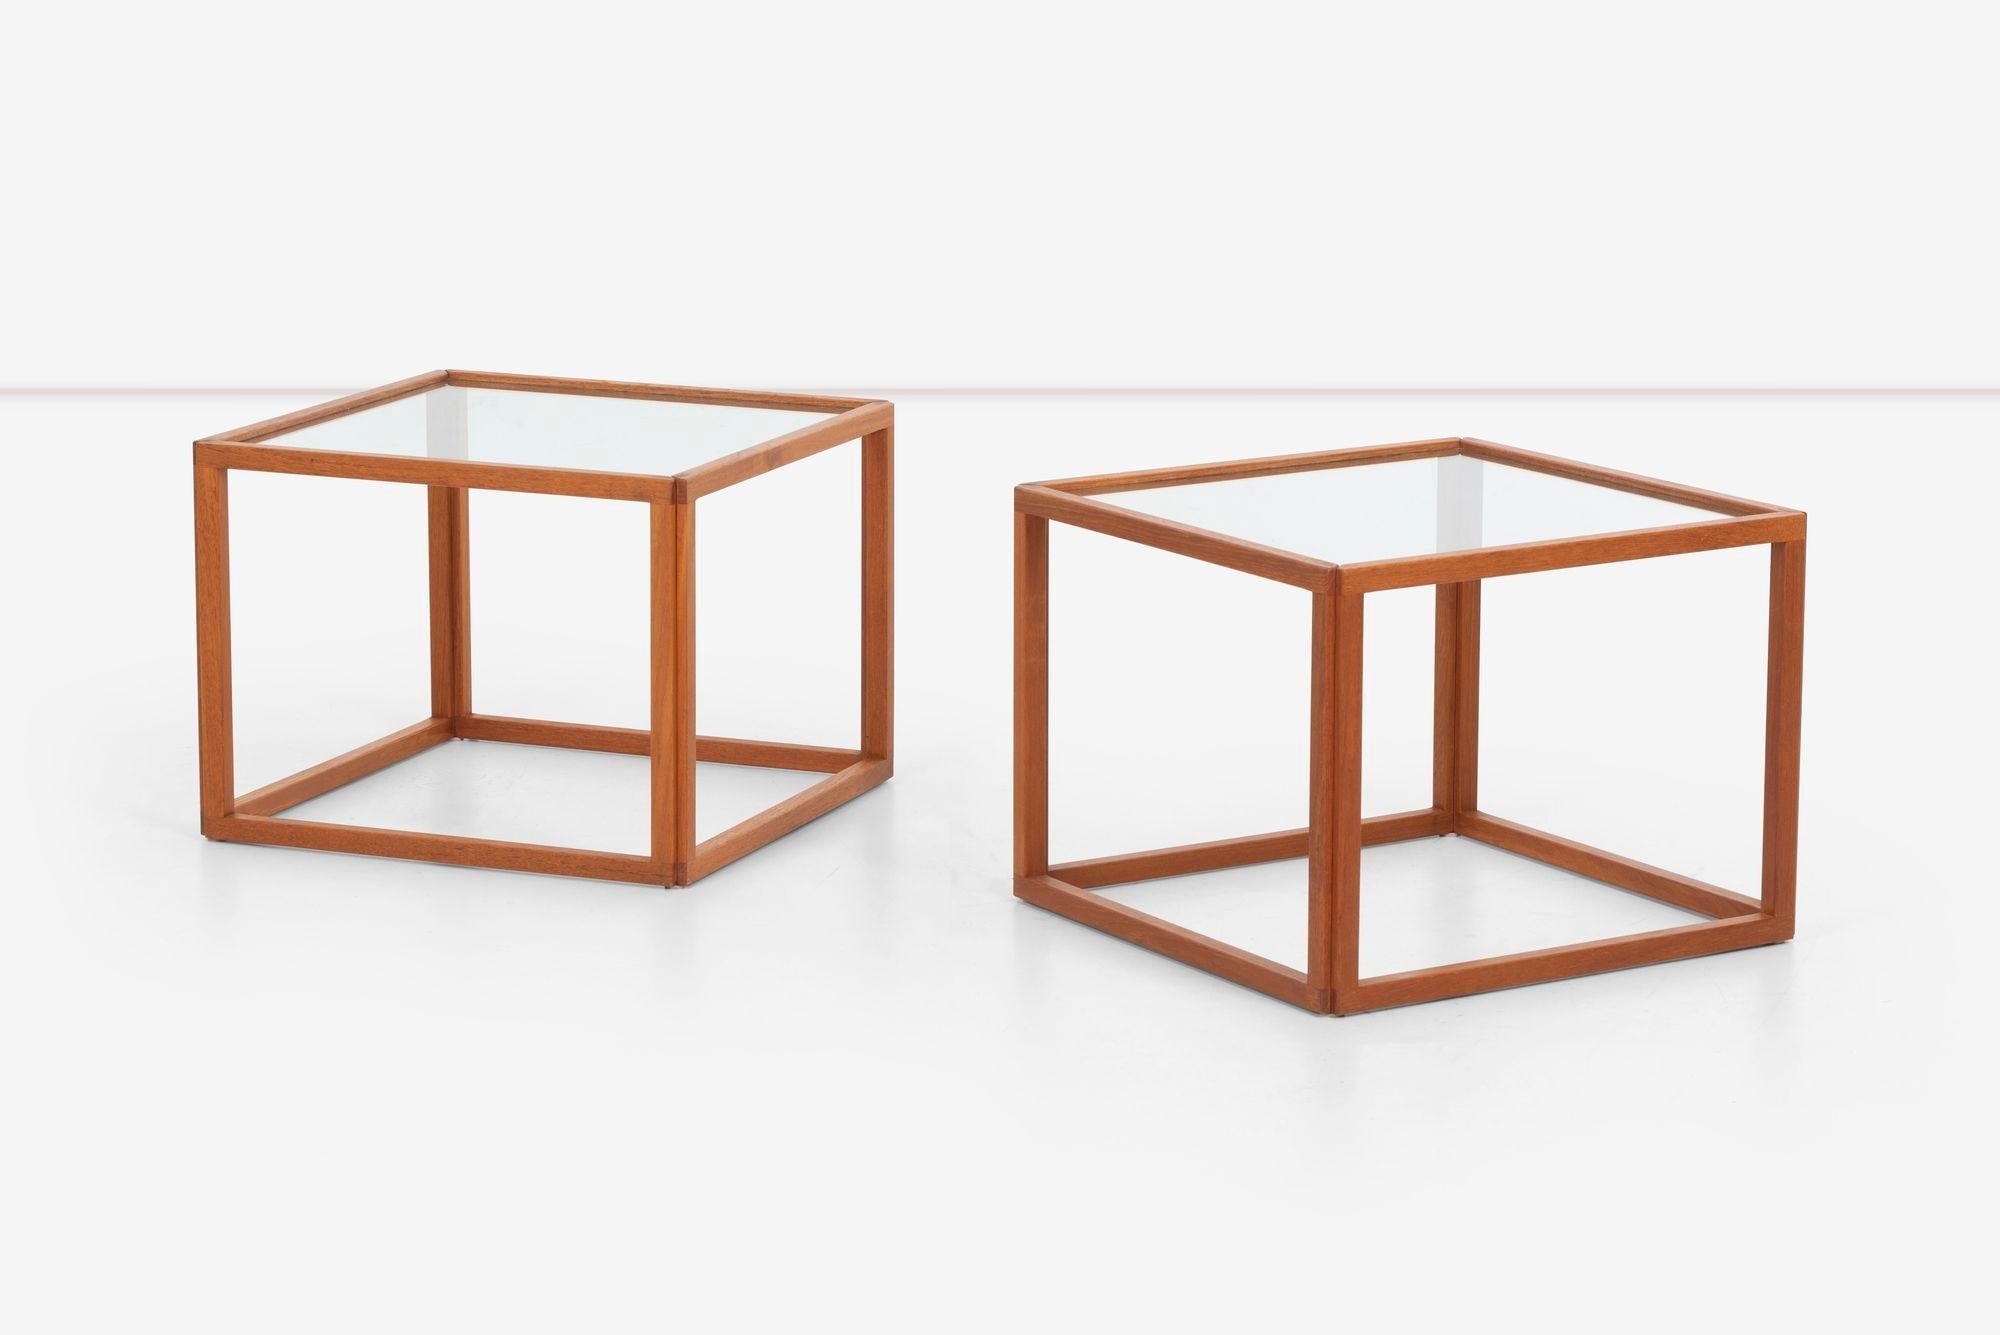 Pair of Kai Kristiansen cube tables Made from solid teak wood and glass.